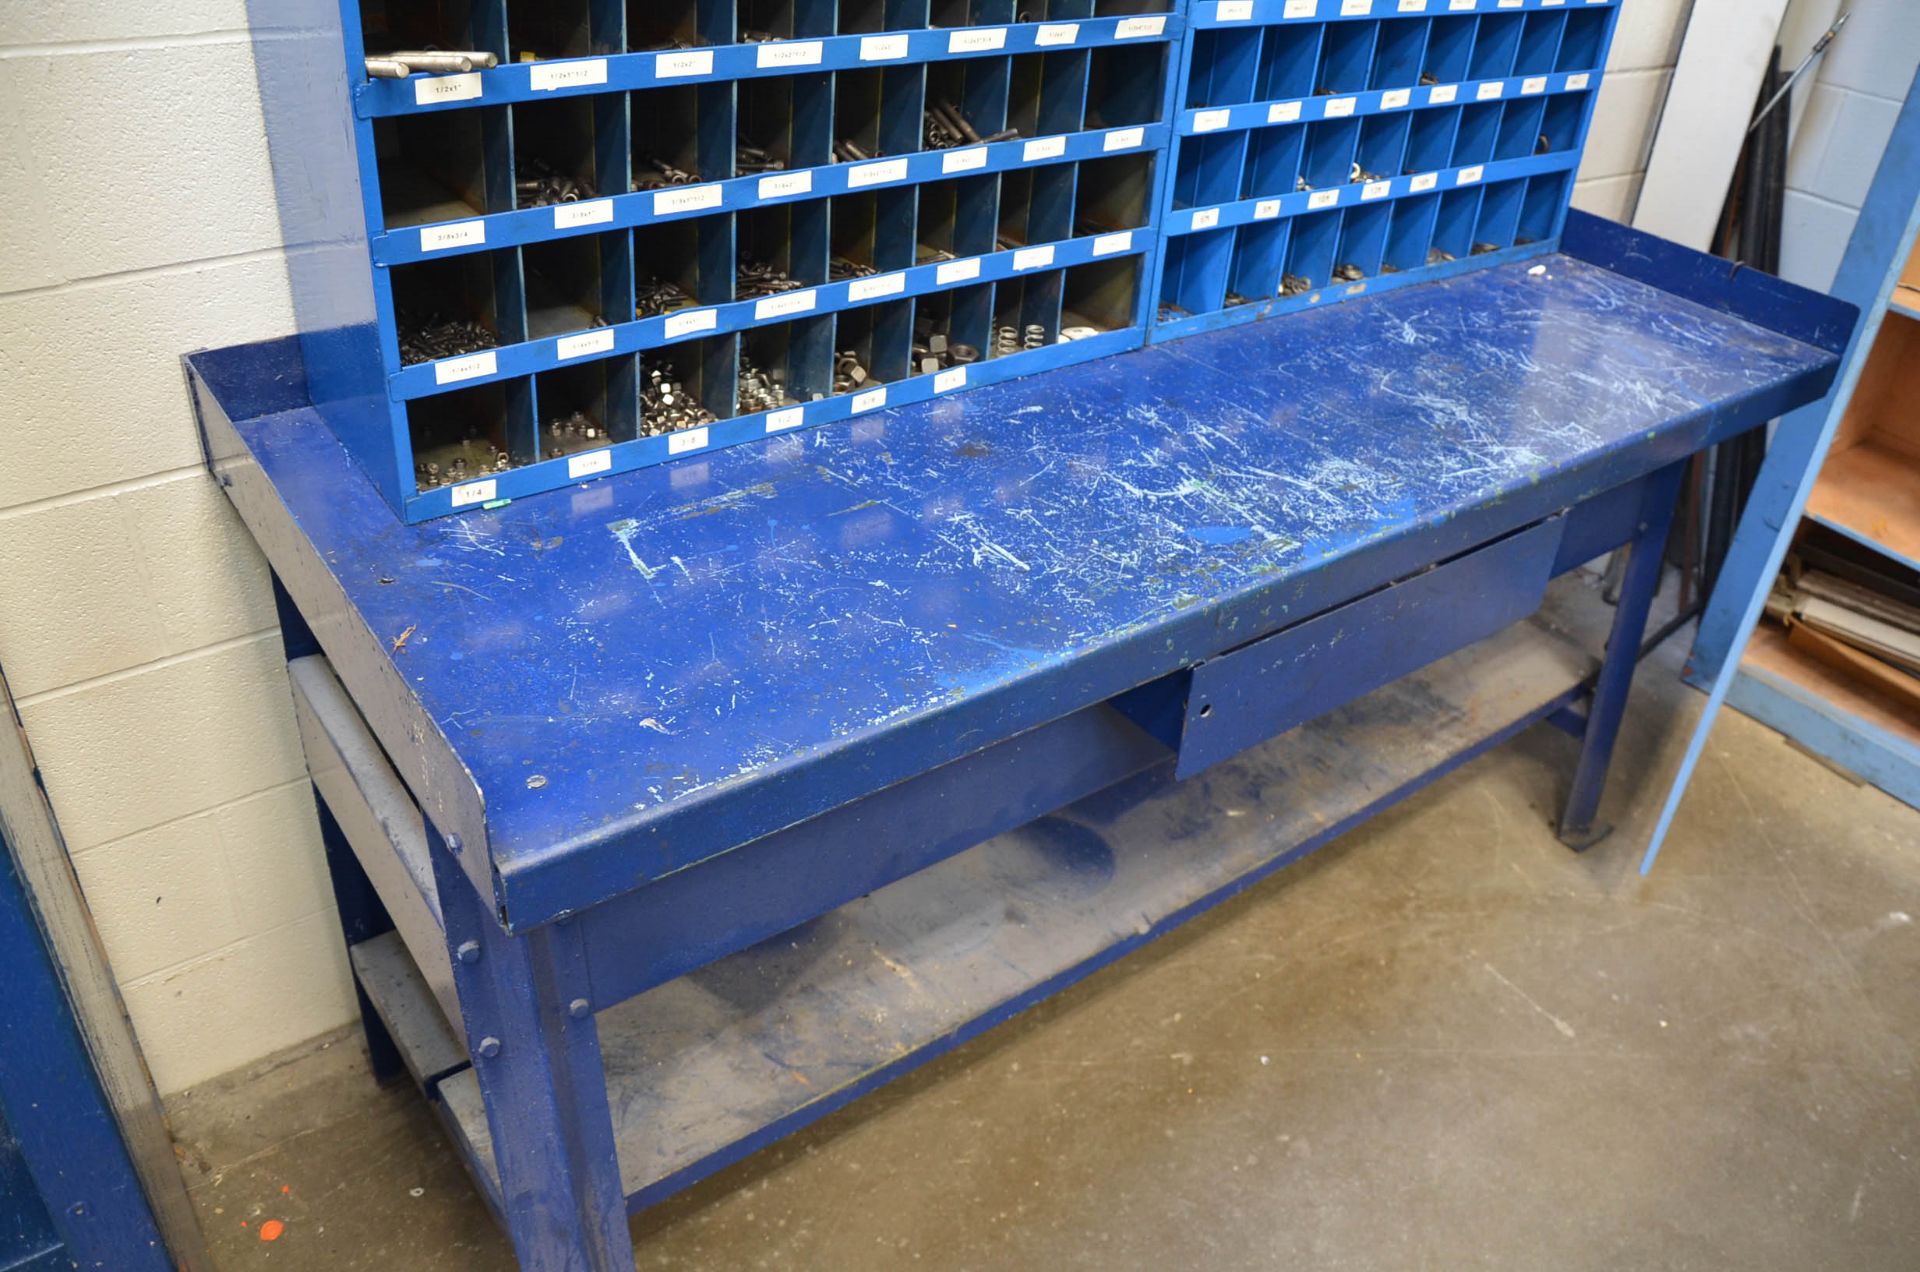 LOT/ FASTENAL PIGEON HOLE INDEX CABINETS WITH FASTENING HARDWARE AND STEEL WORK BENCH - Image 4 of 4